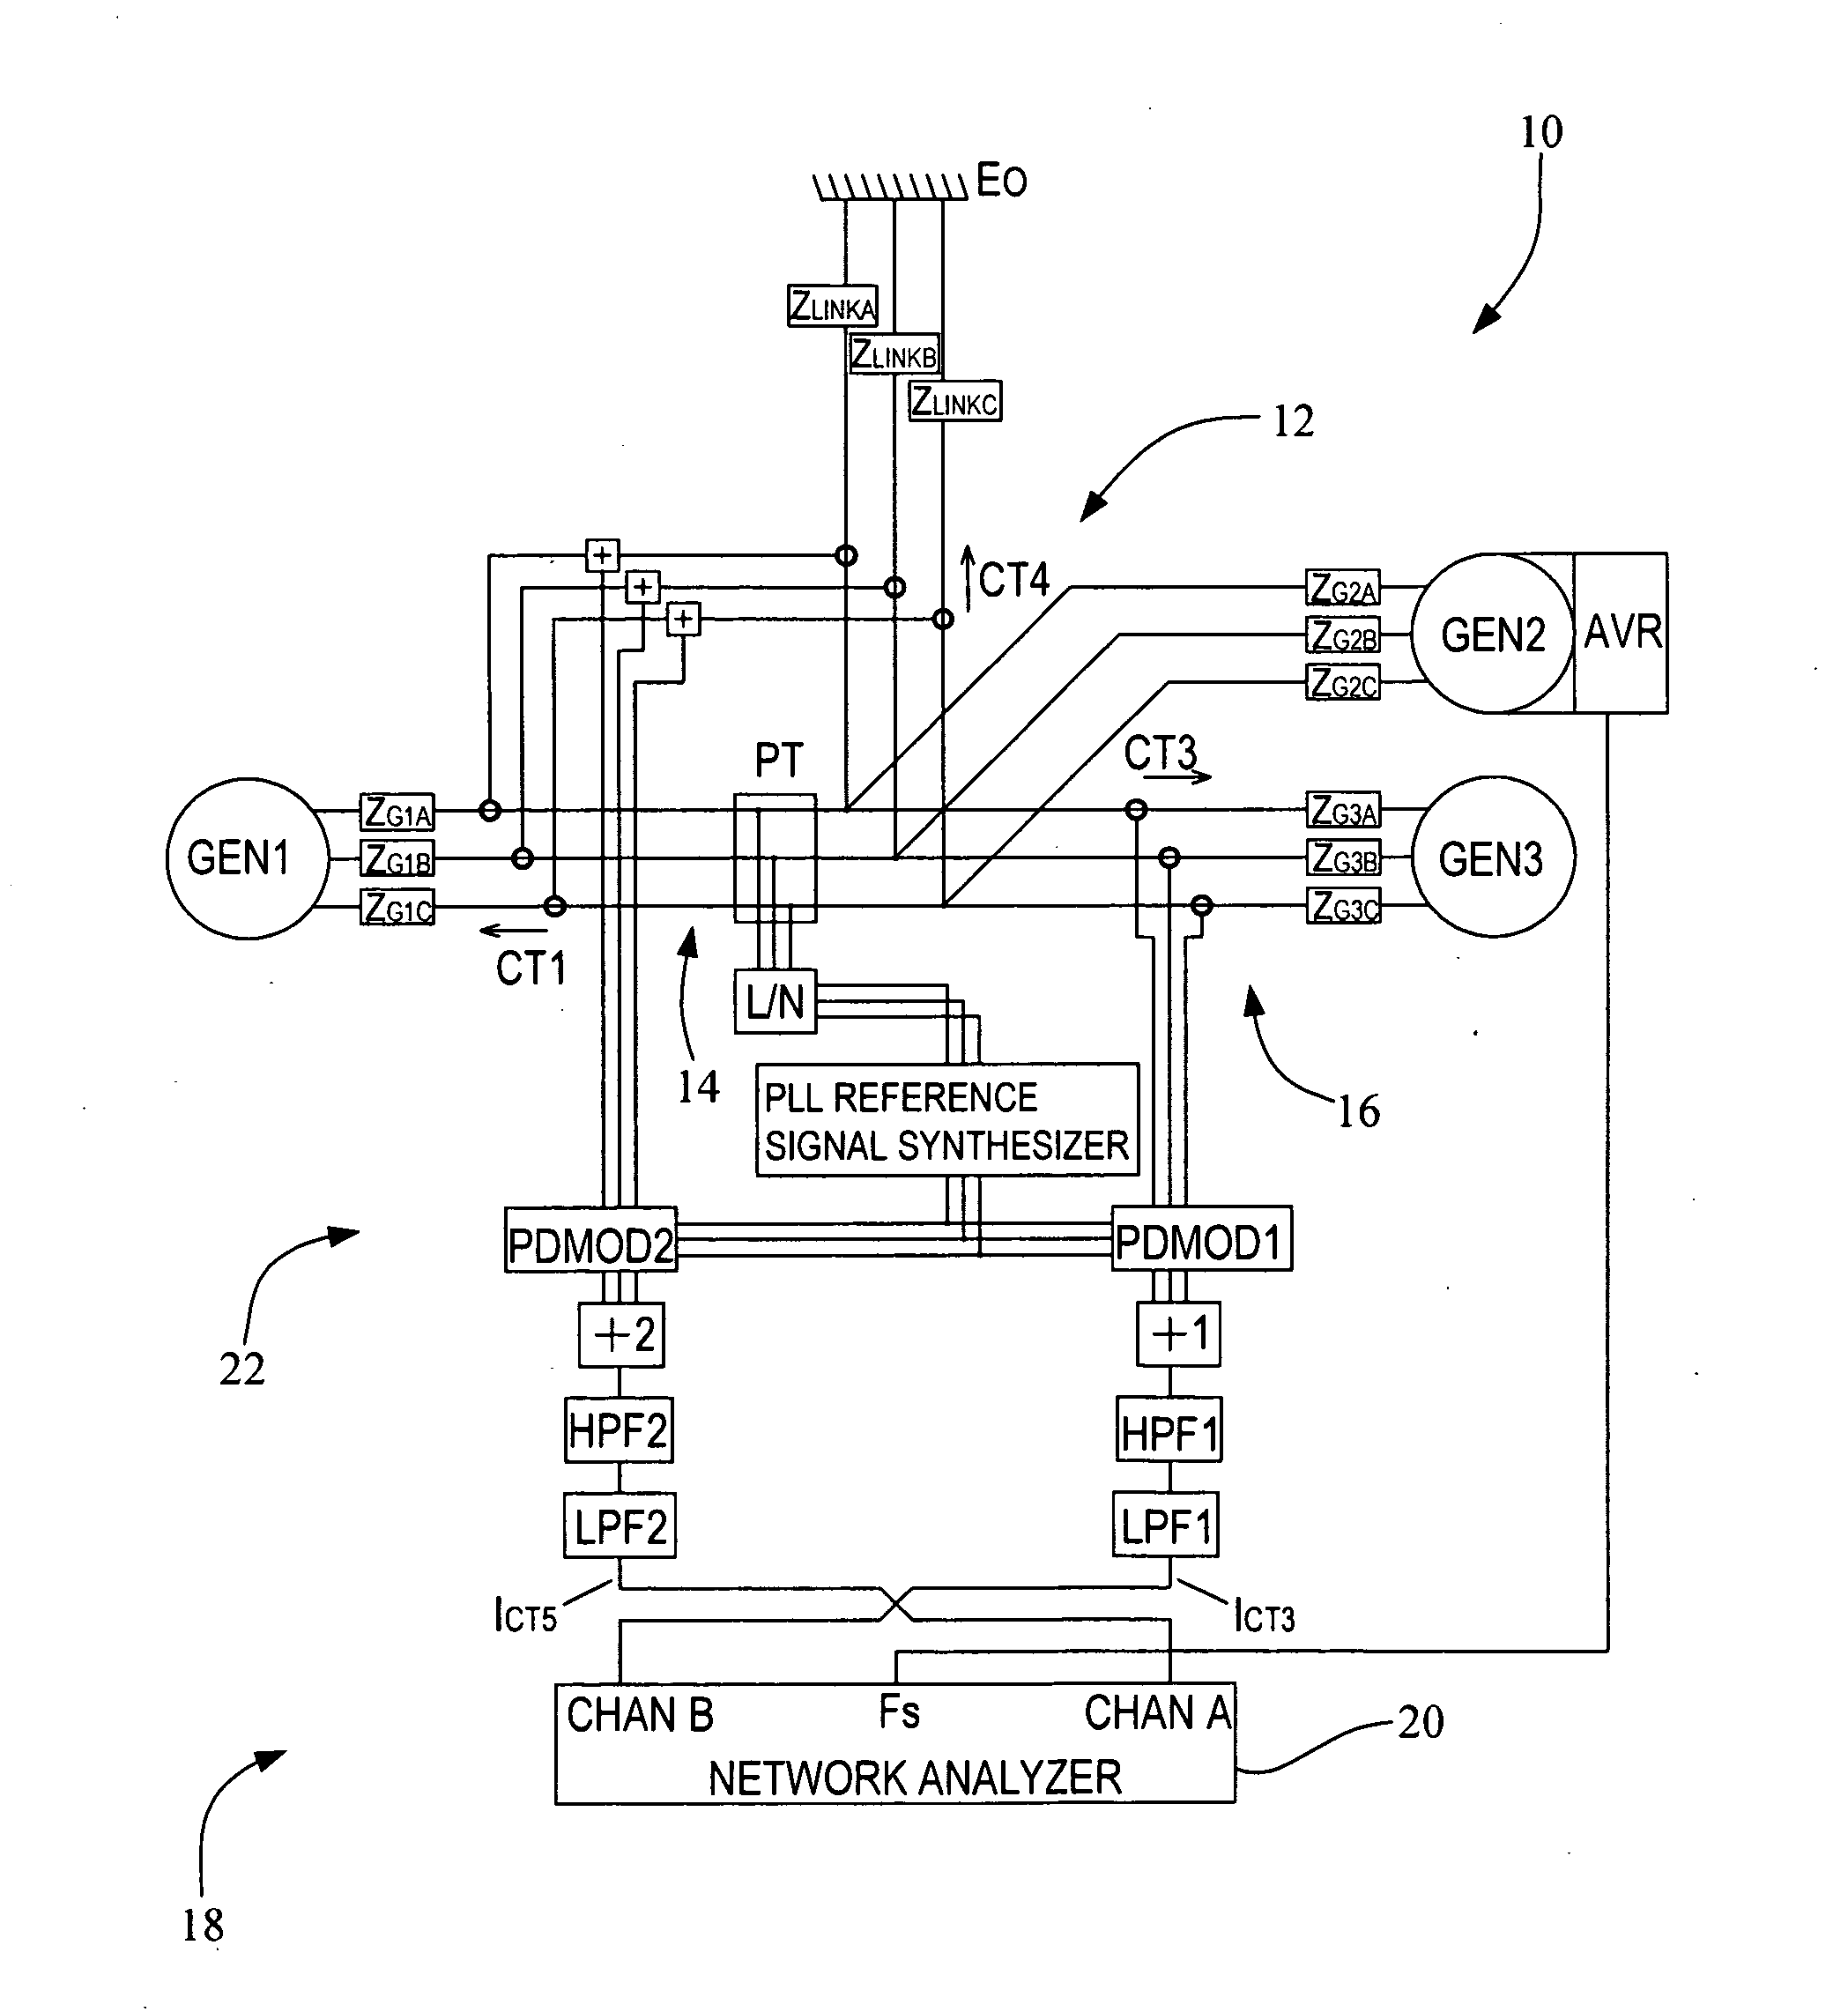 Method for measuring d-q impedance of polyphase power grid components